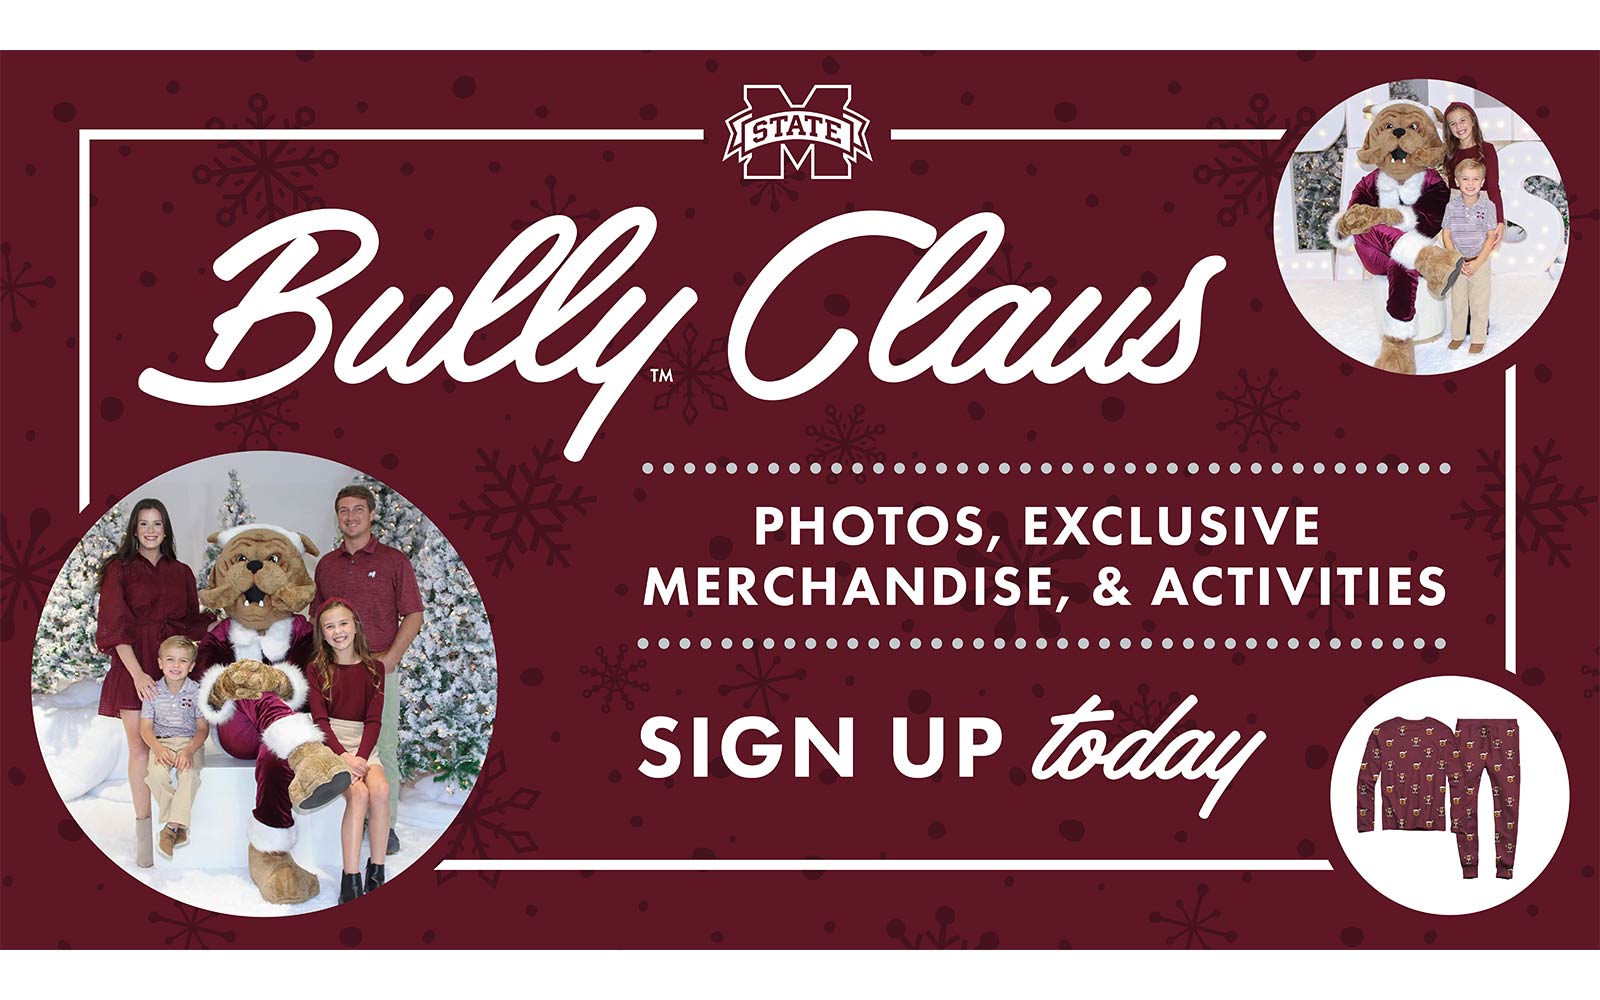 Bully - Enter by Jan 9th for a chance to win the Bully